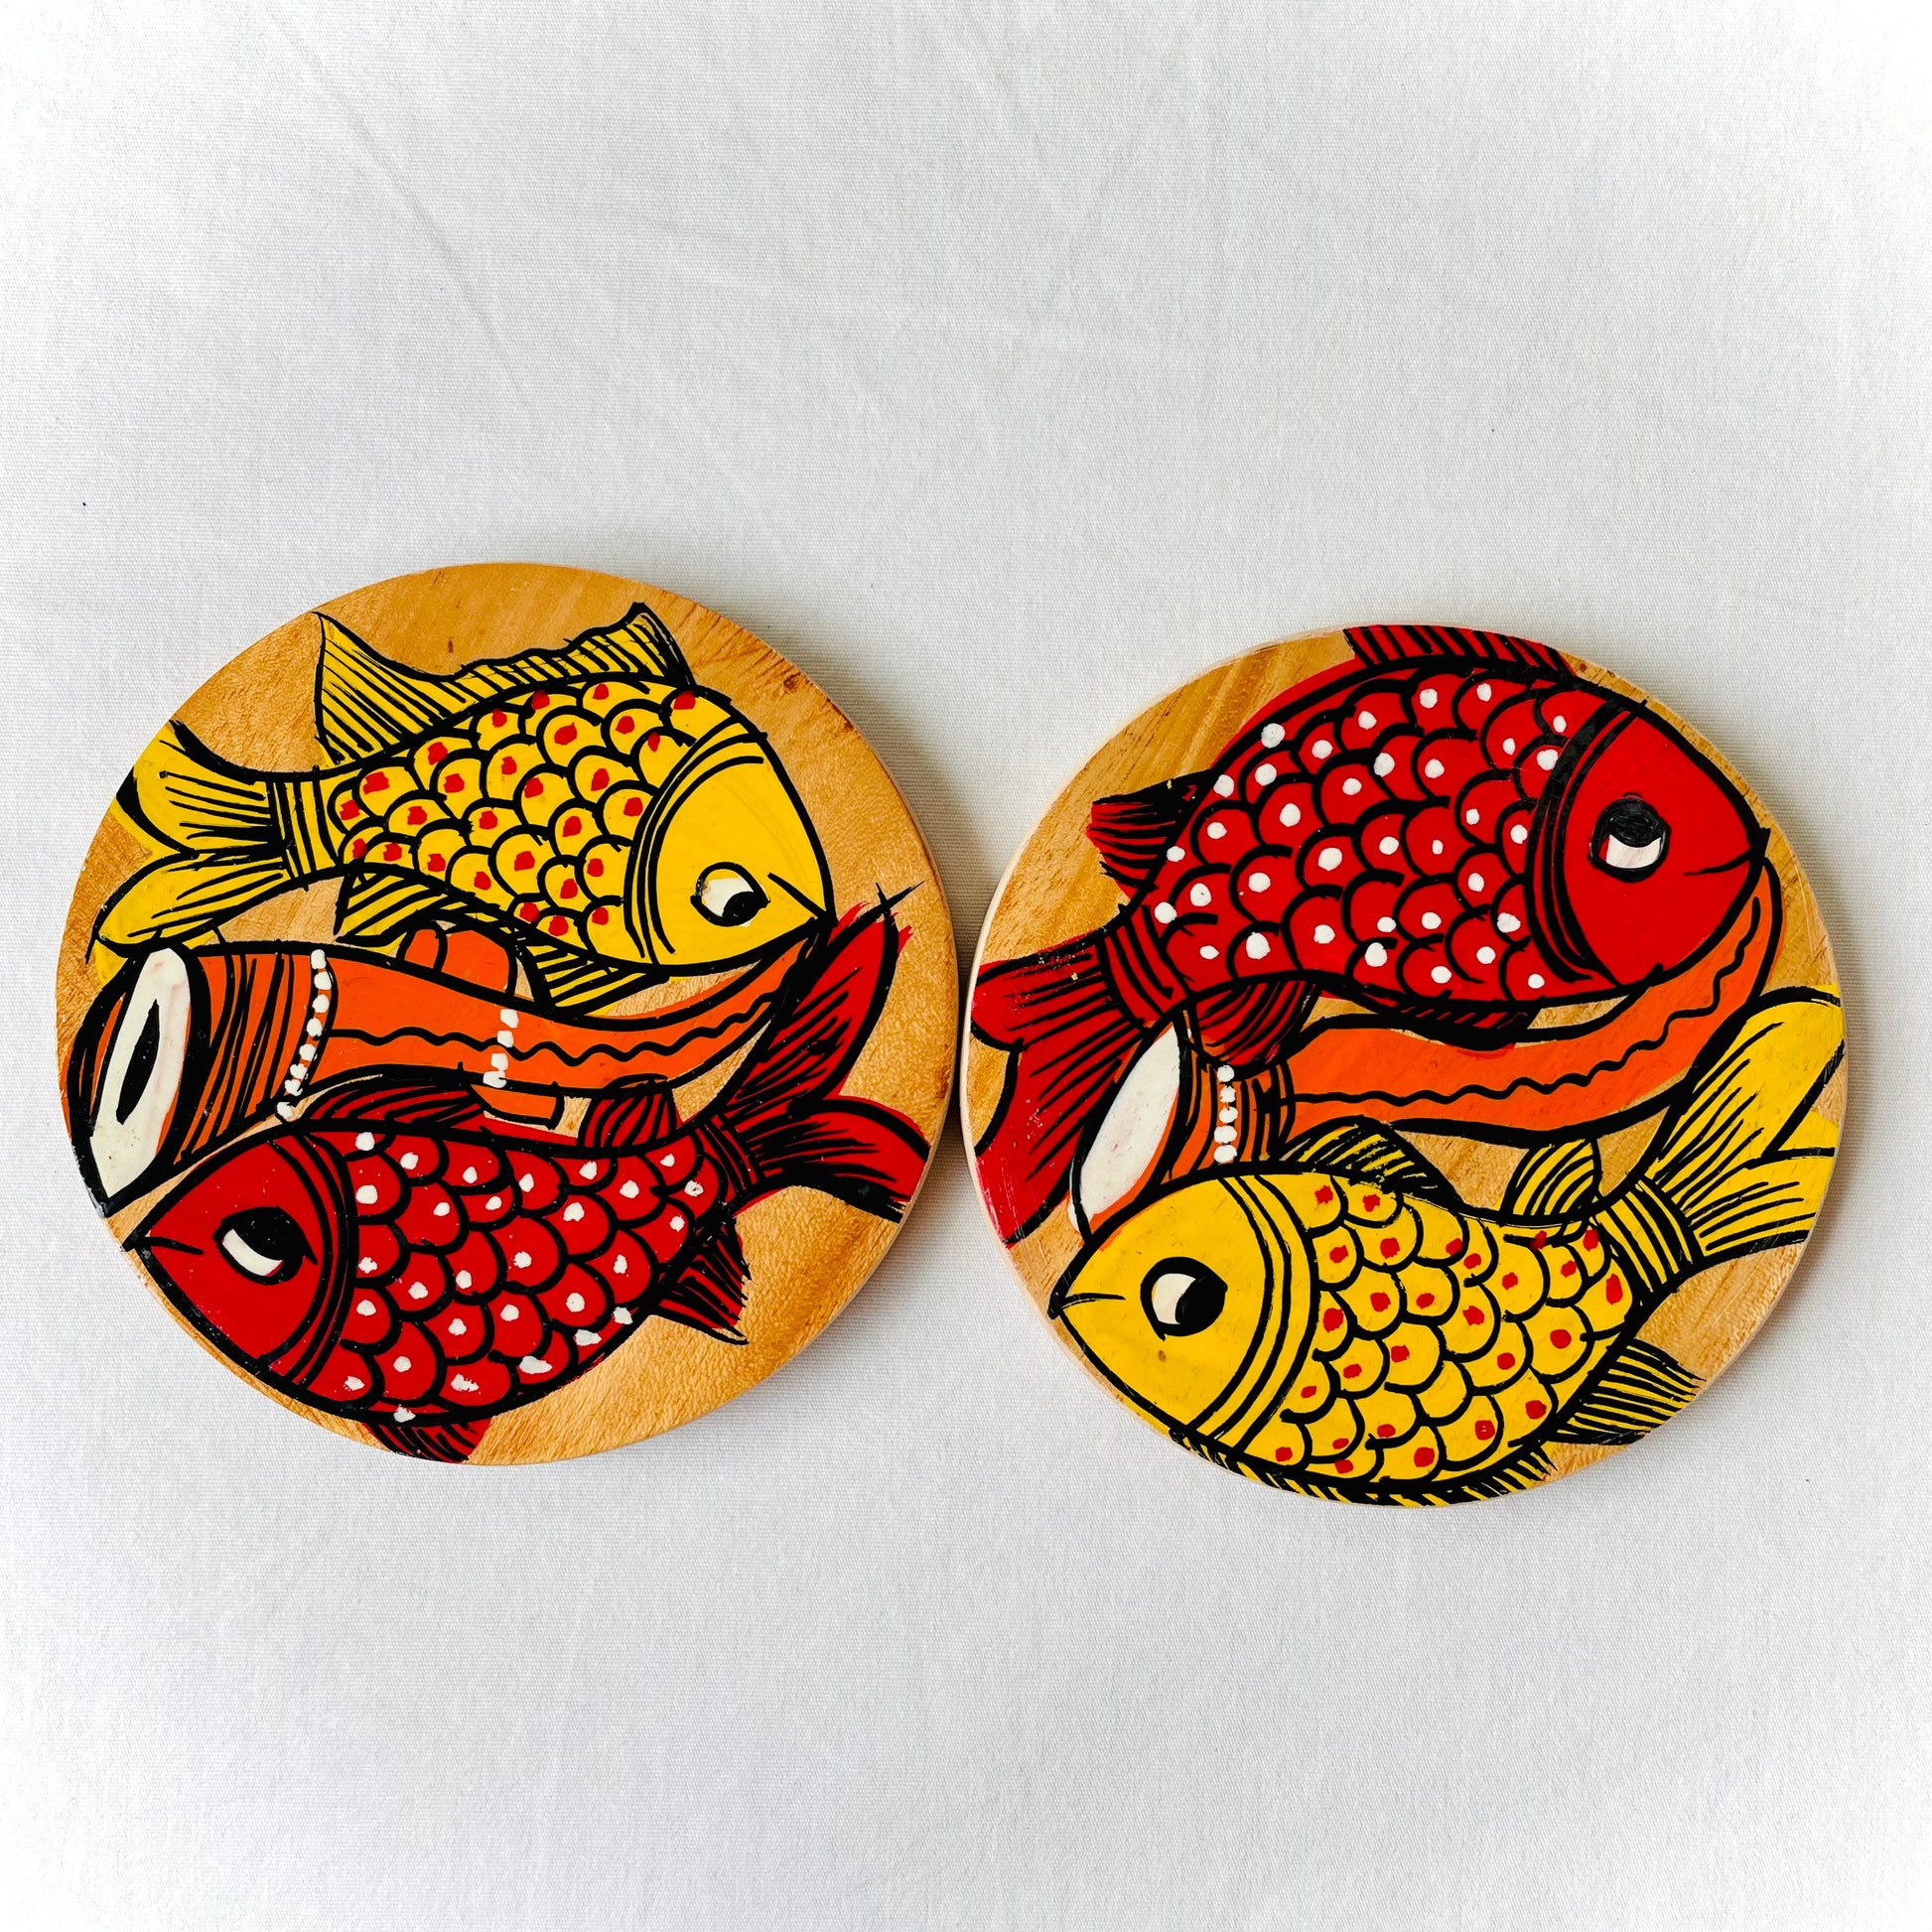 Two round wood coasters displayed against a white background, feature one yellow fish and one redfish along with an Indian classical musical instrument in each wood coaster